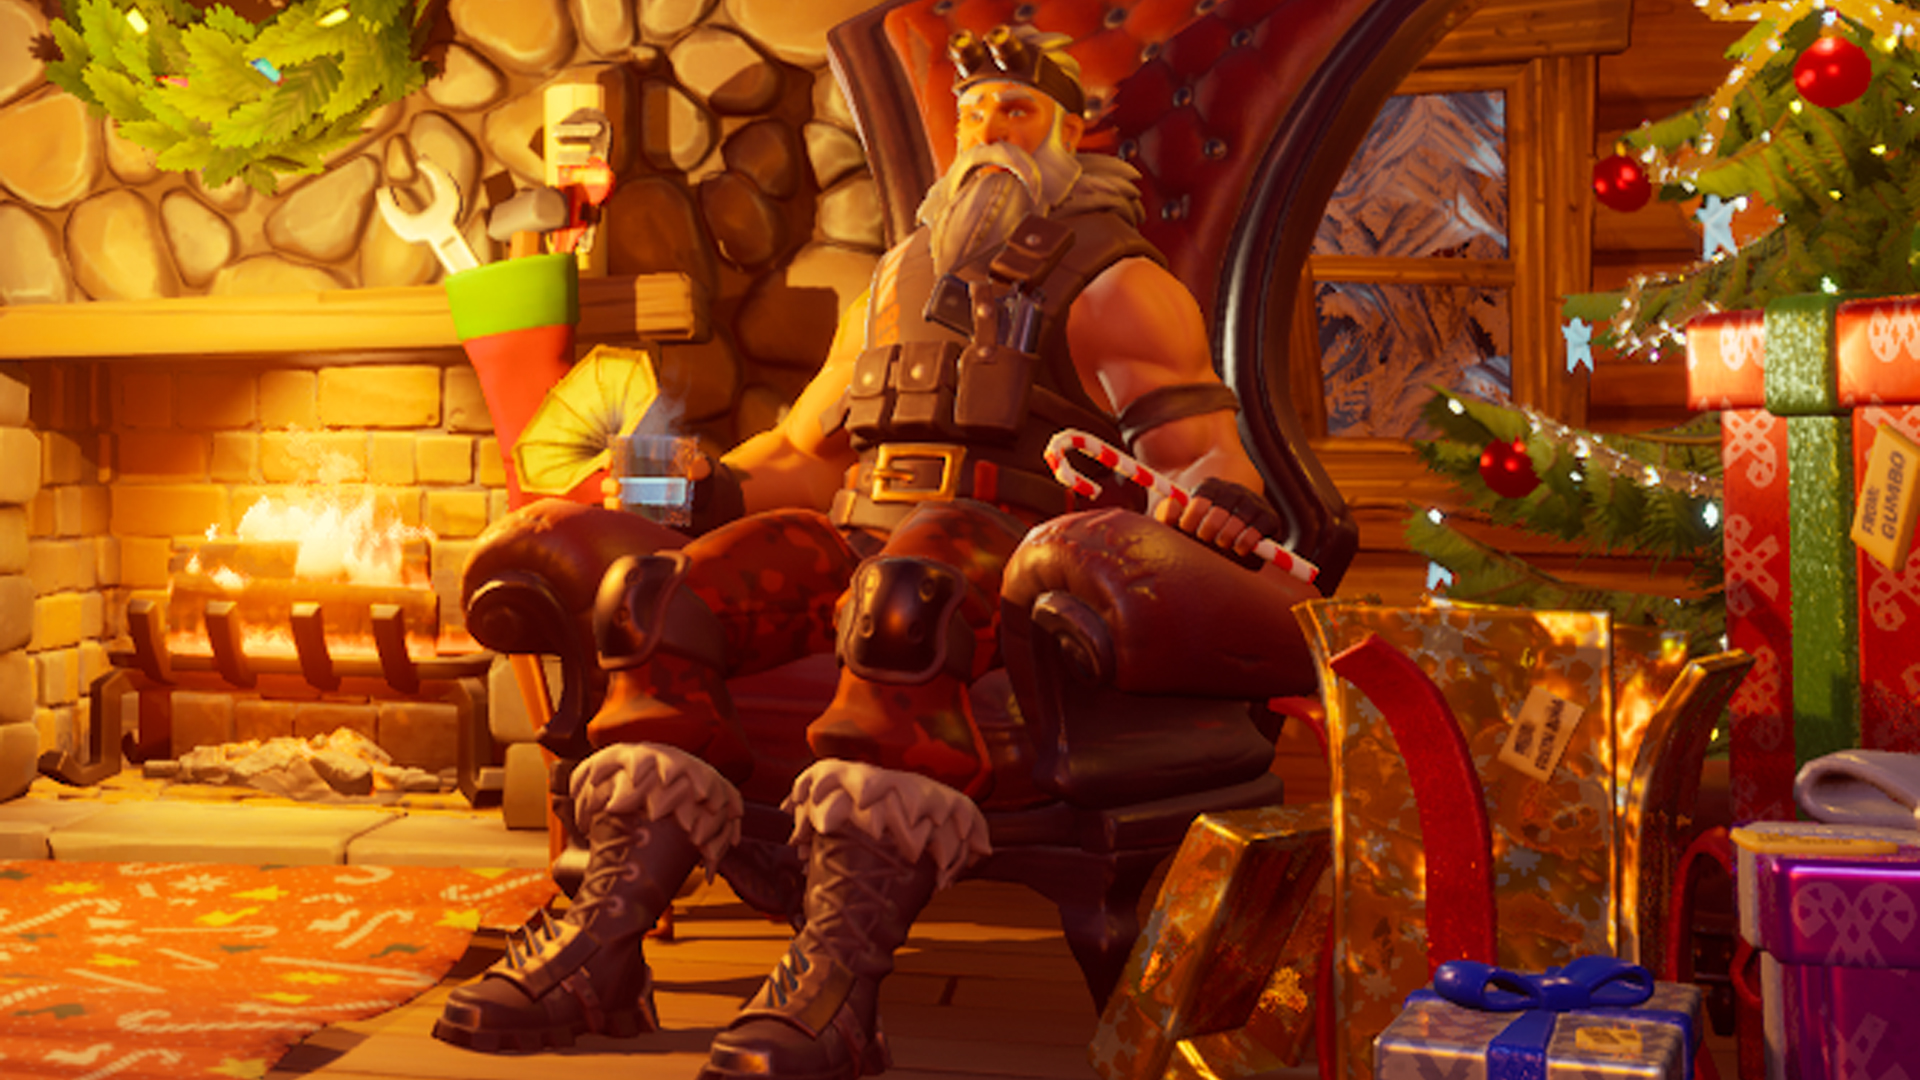 Fortnite players may get a server outage reward and their rogue Xmas present